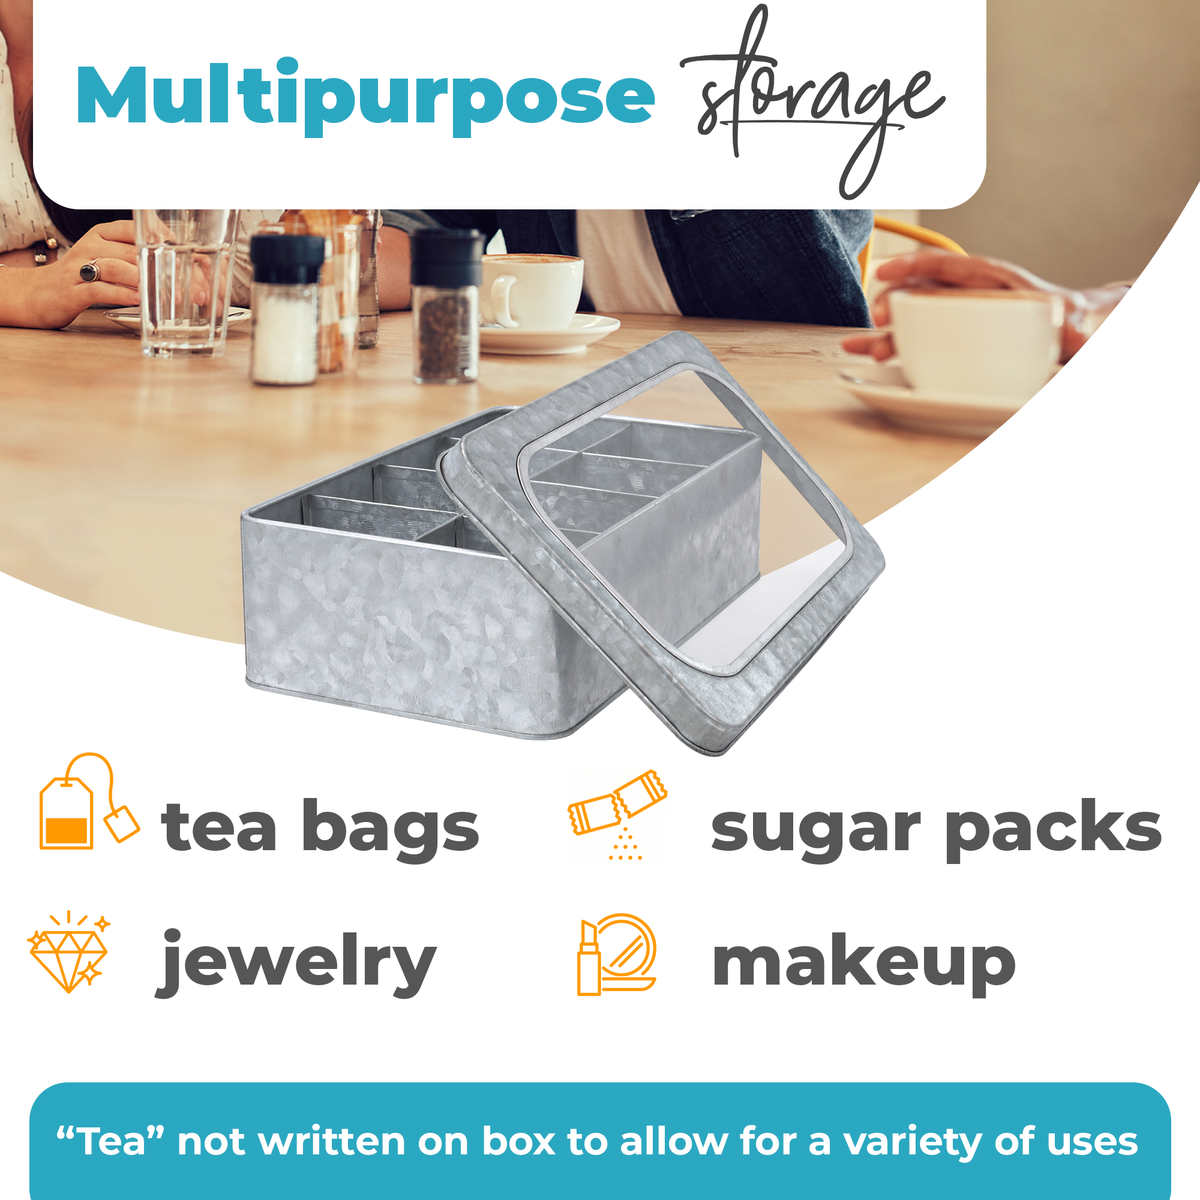 Galvanized Tea box purposely unlabeled to allow a variety of uses. Can be used with sugar packs, jewelry or makeup.